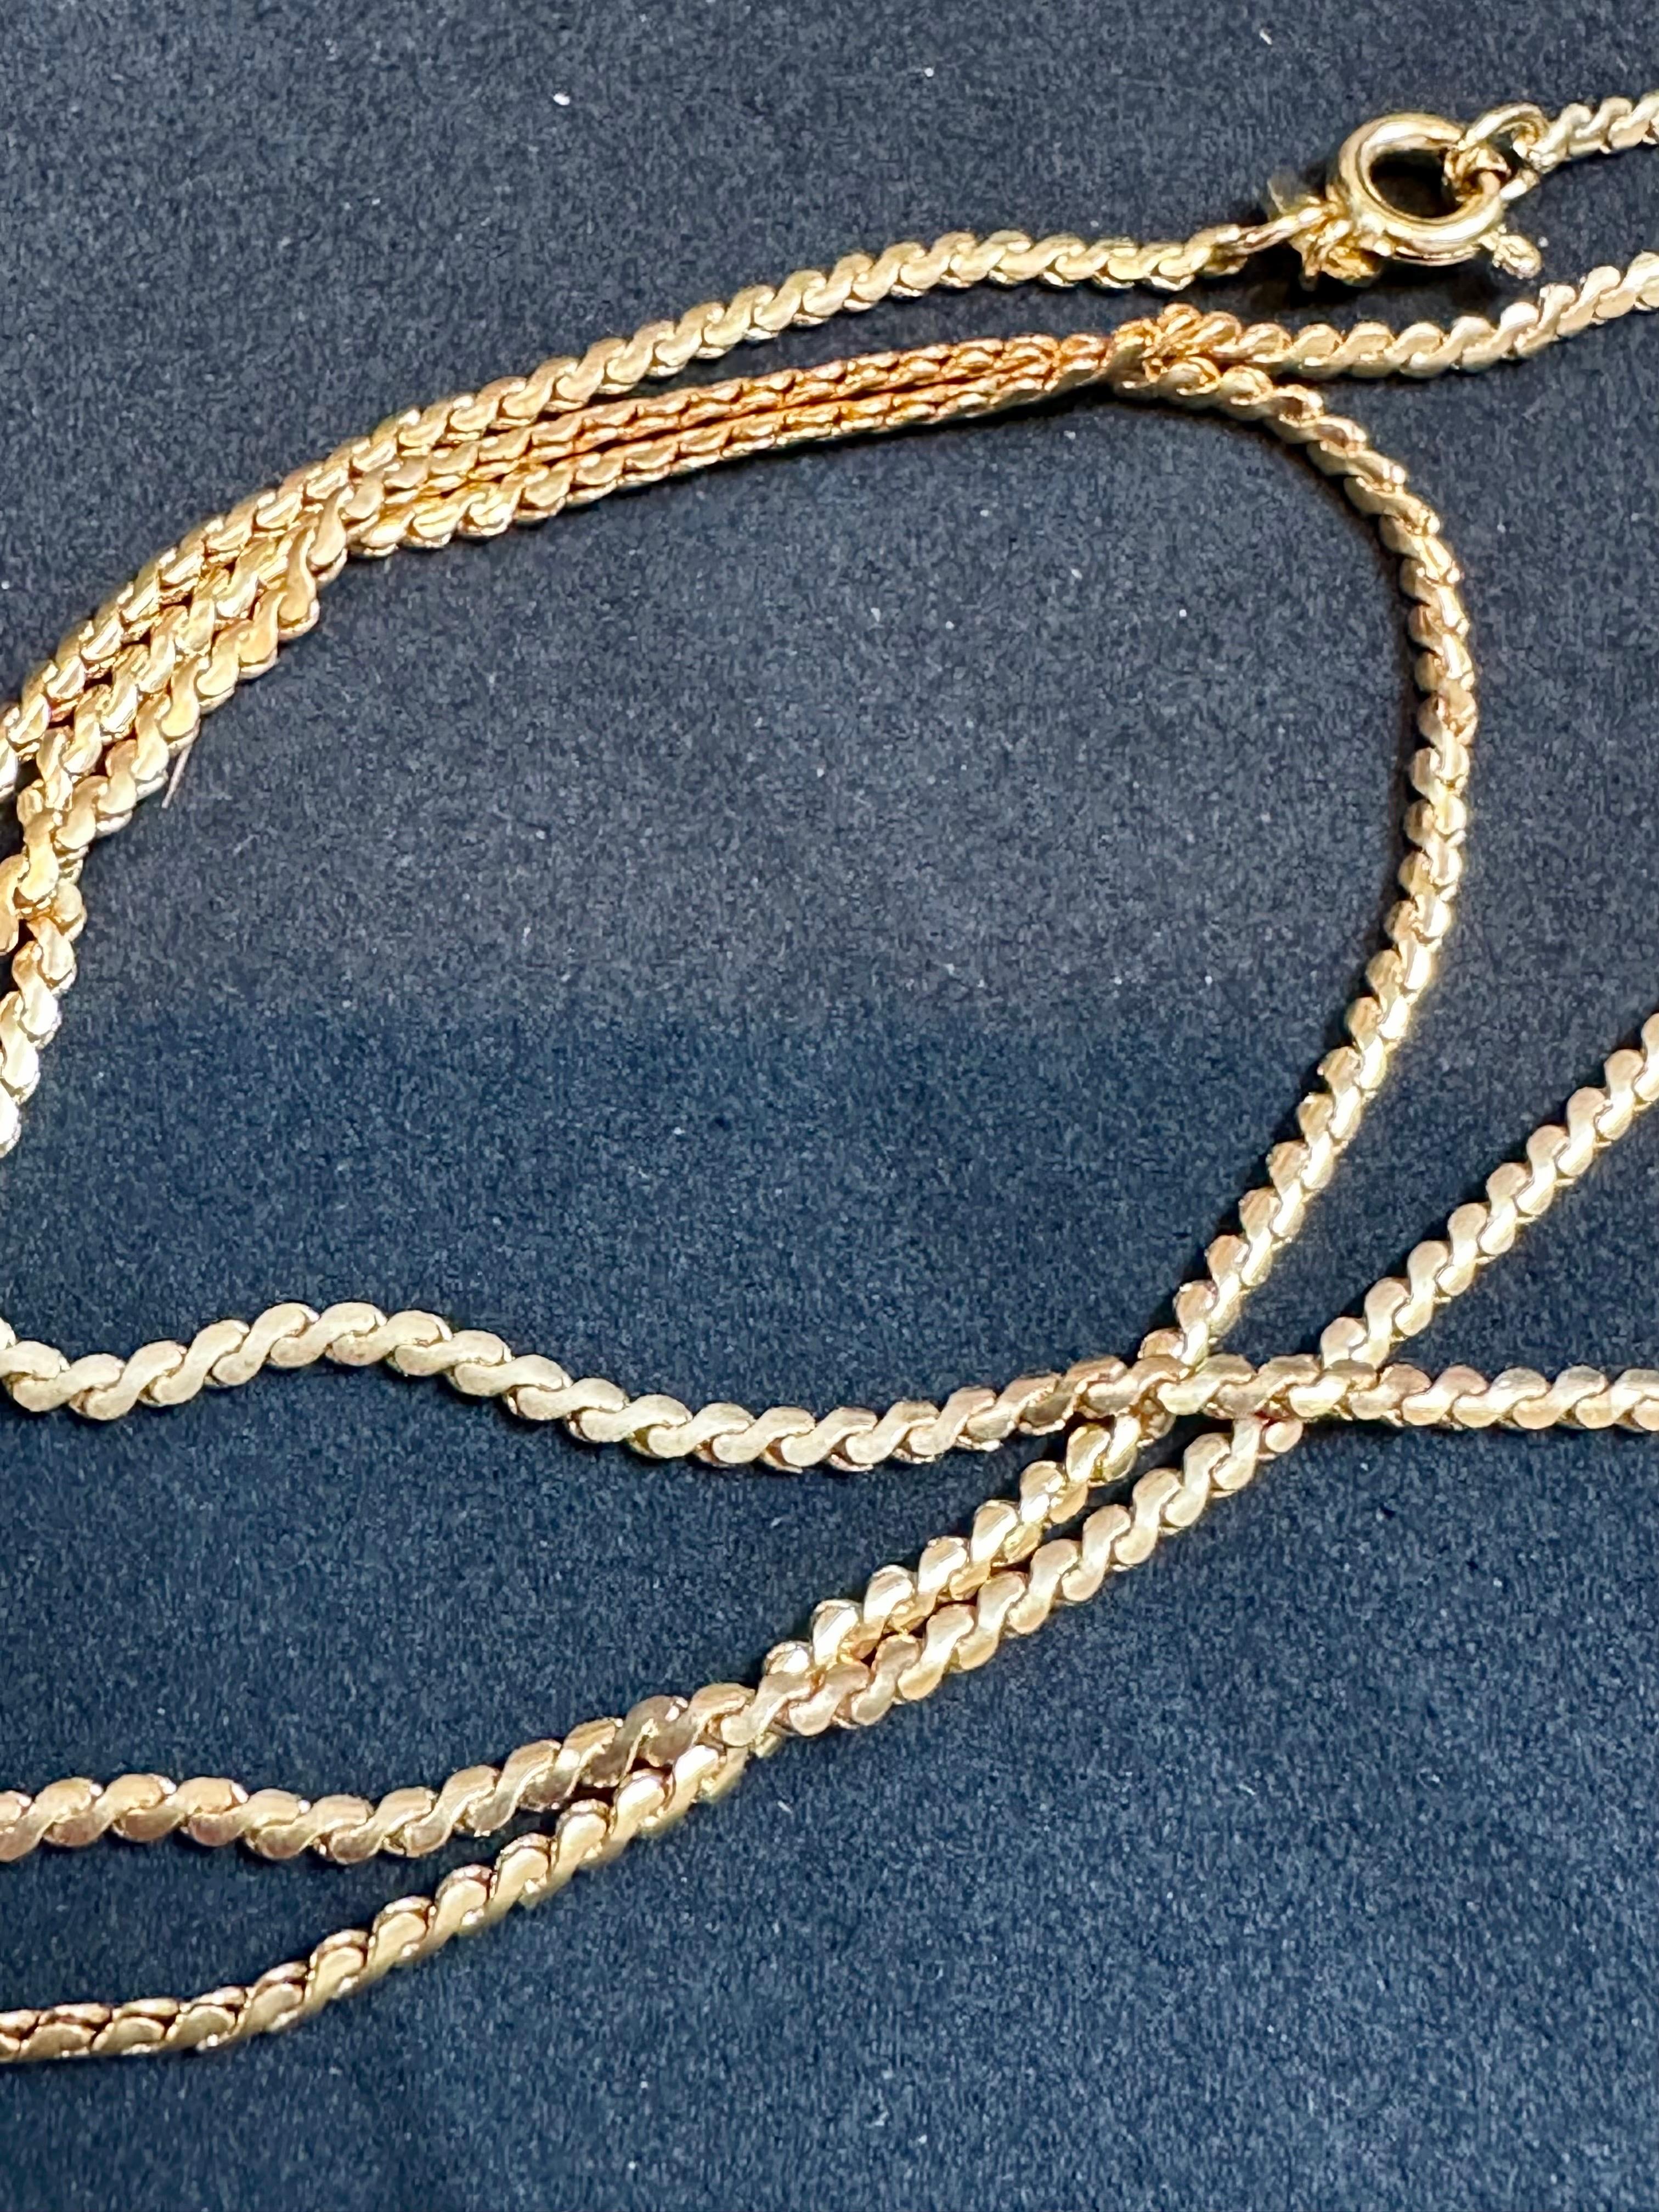 Vintage 18 Karat Yellow Gold 9.6 Gm S Link Chain Necklace For Sale 2